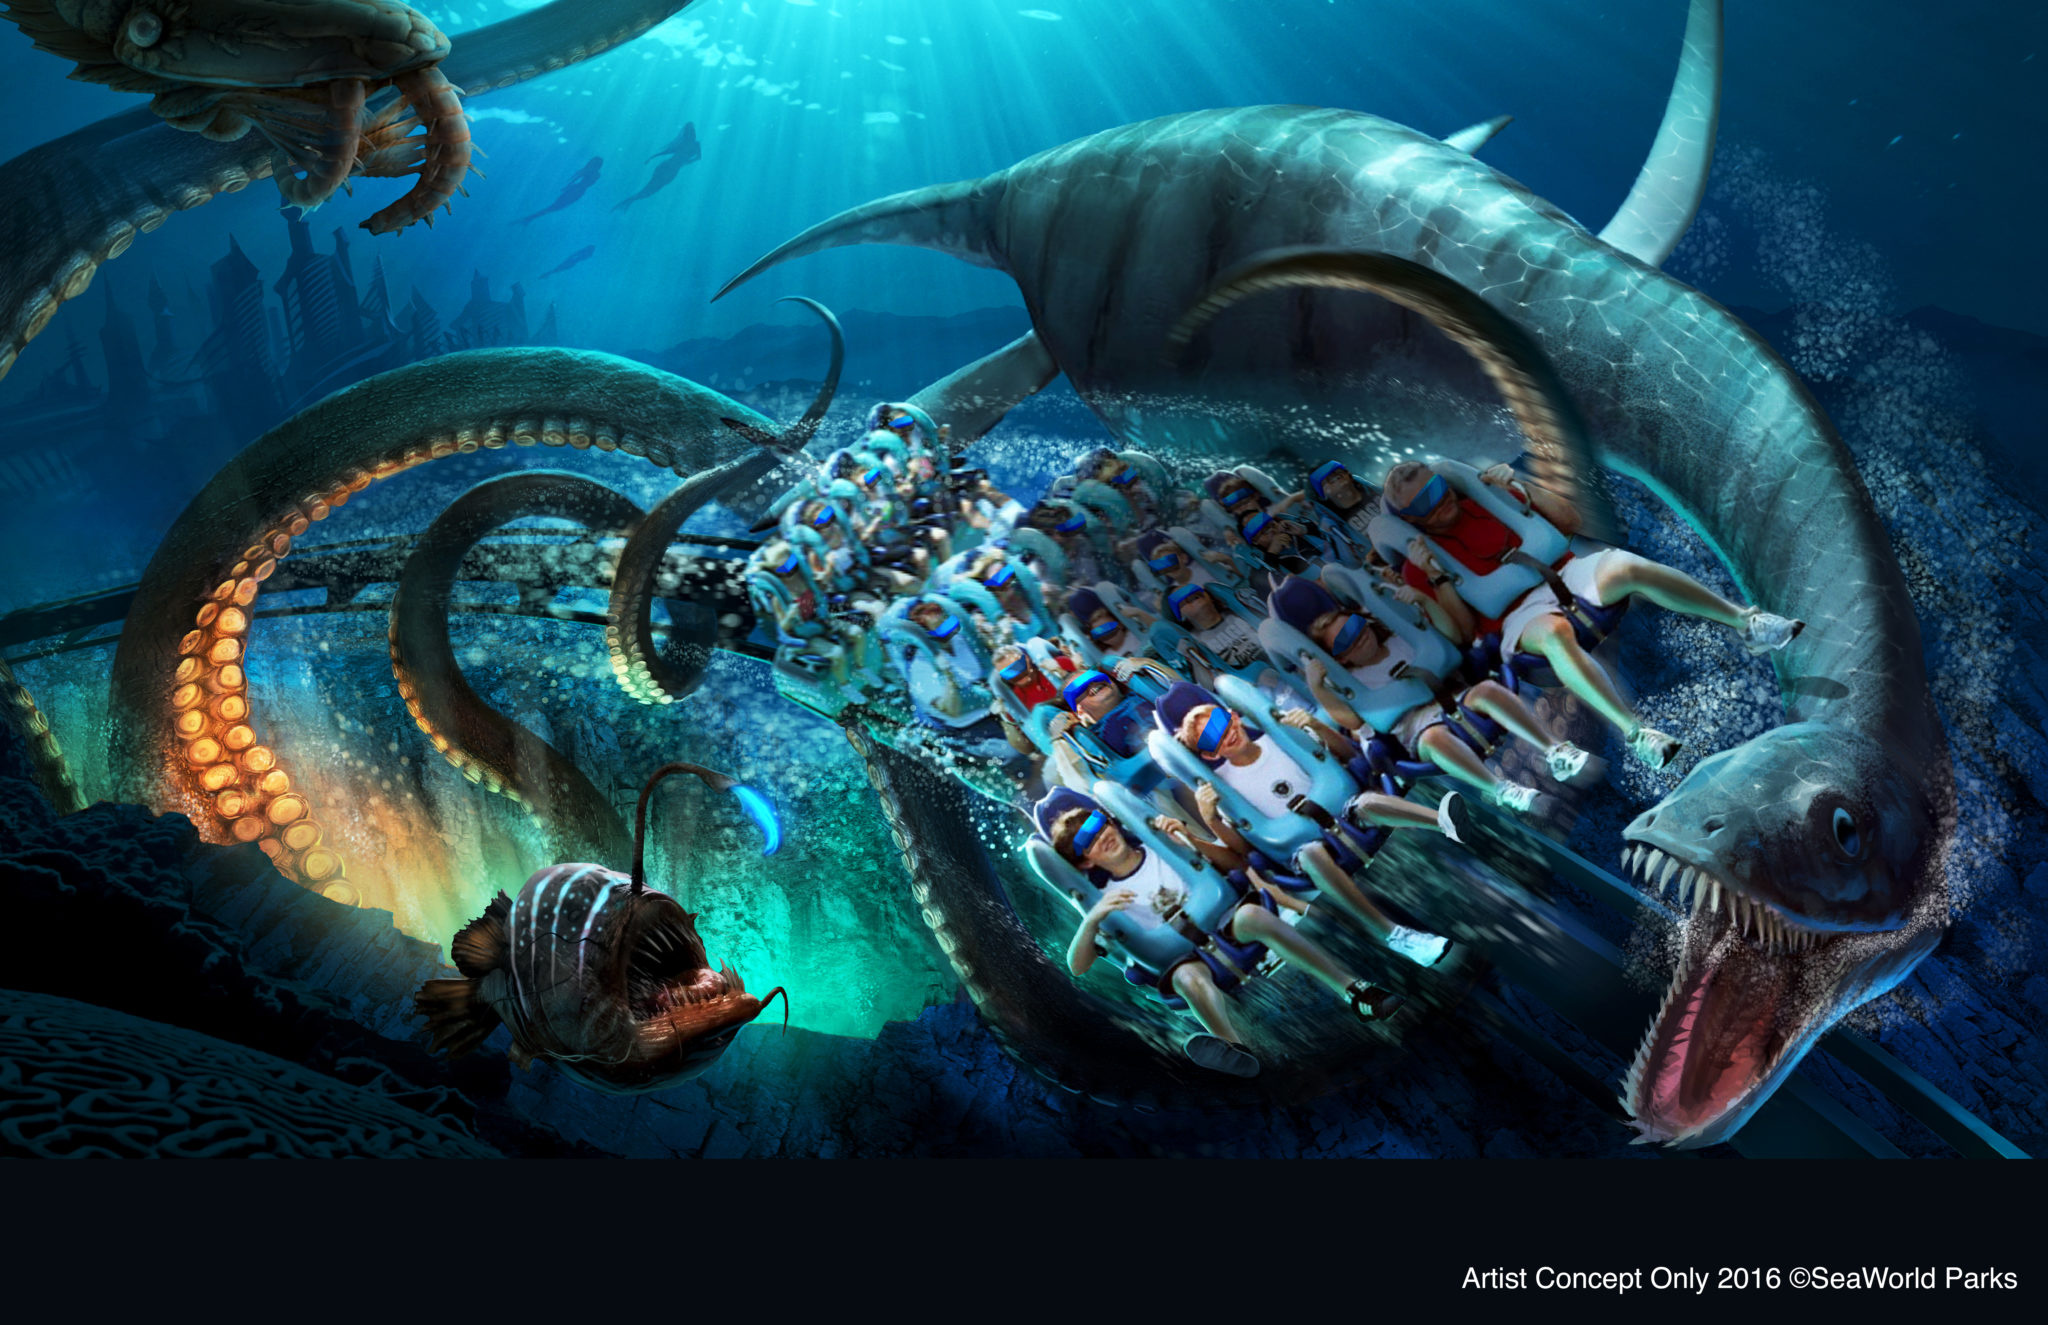 New & Exciting Attractions are coming to Sea World Orlando in 2017